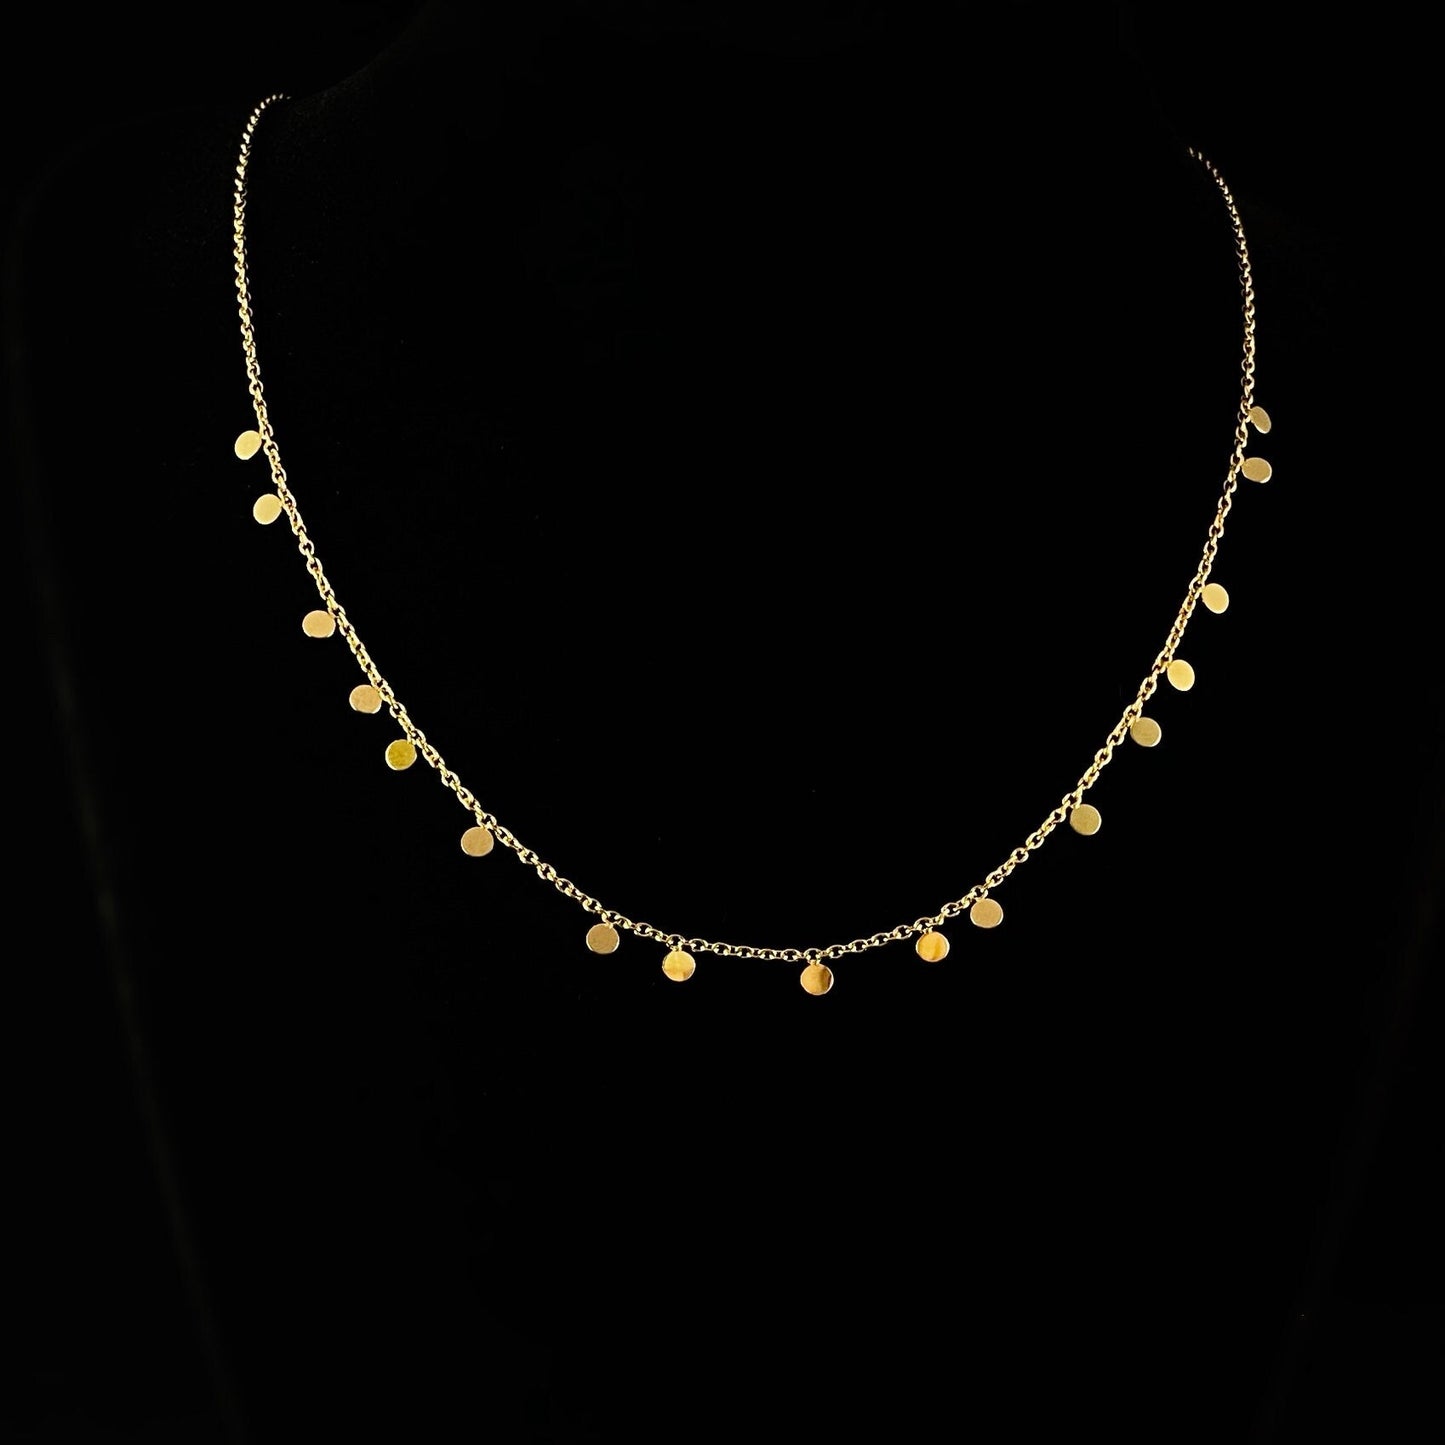 Dainty Gold Chain Necklace with Small Circle Pendants - Sabrina